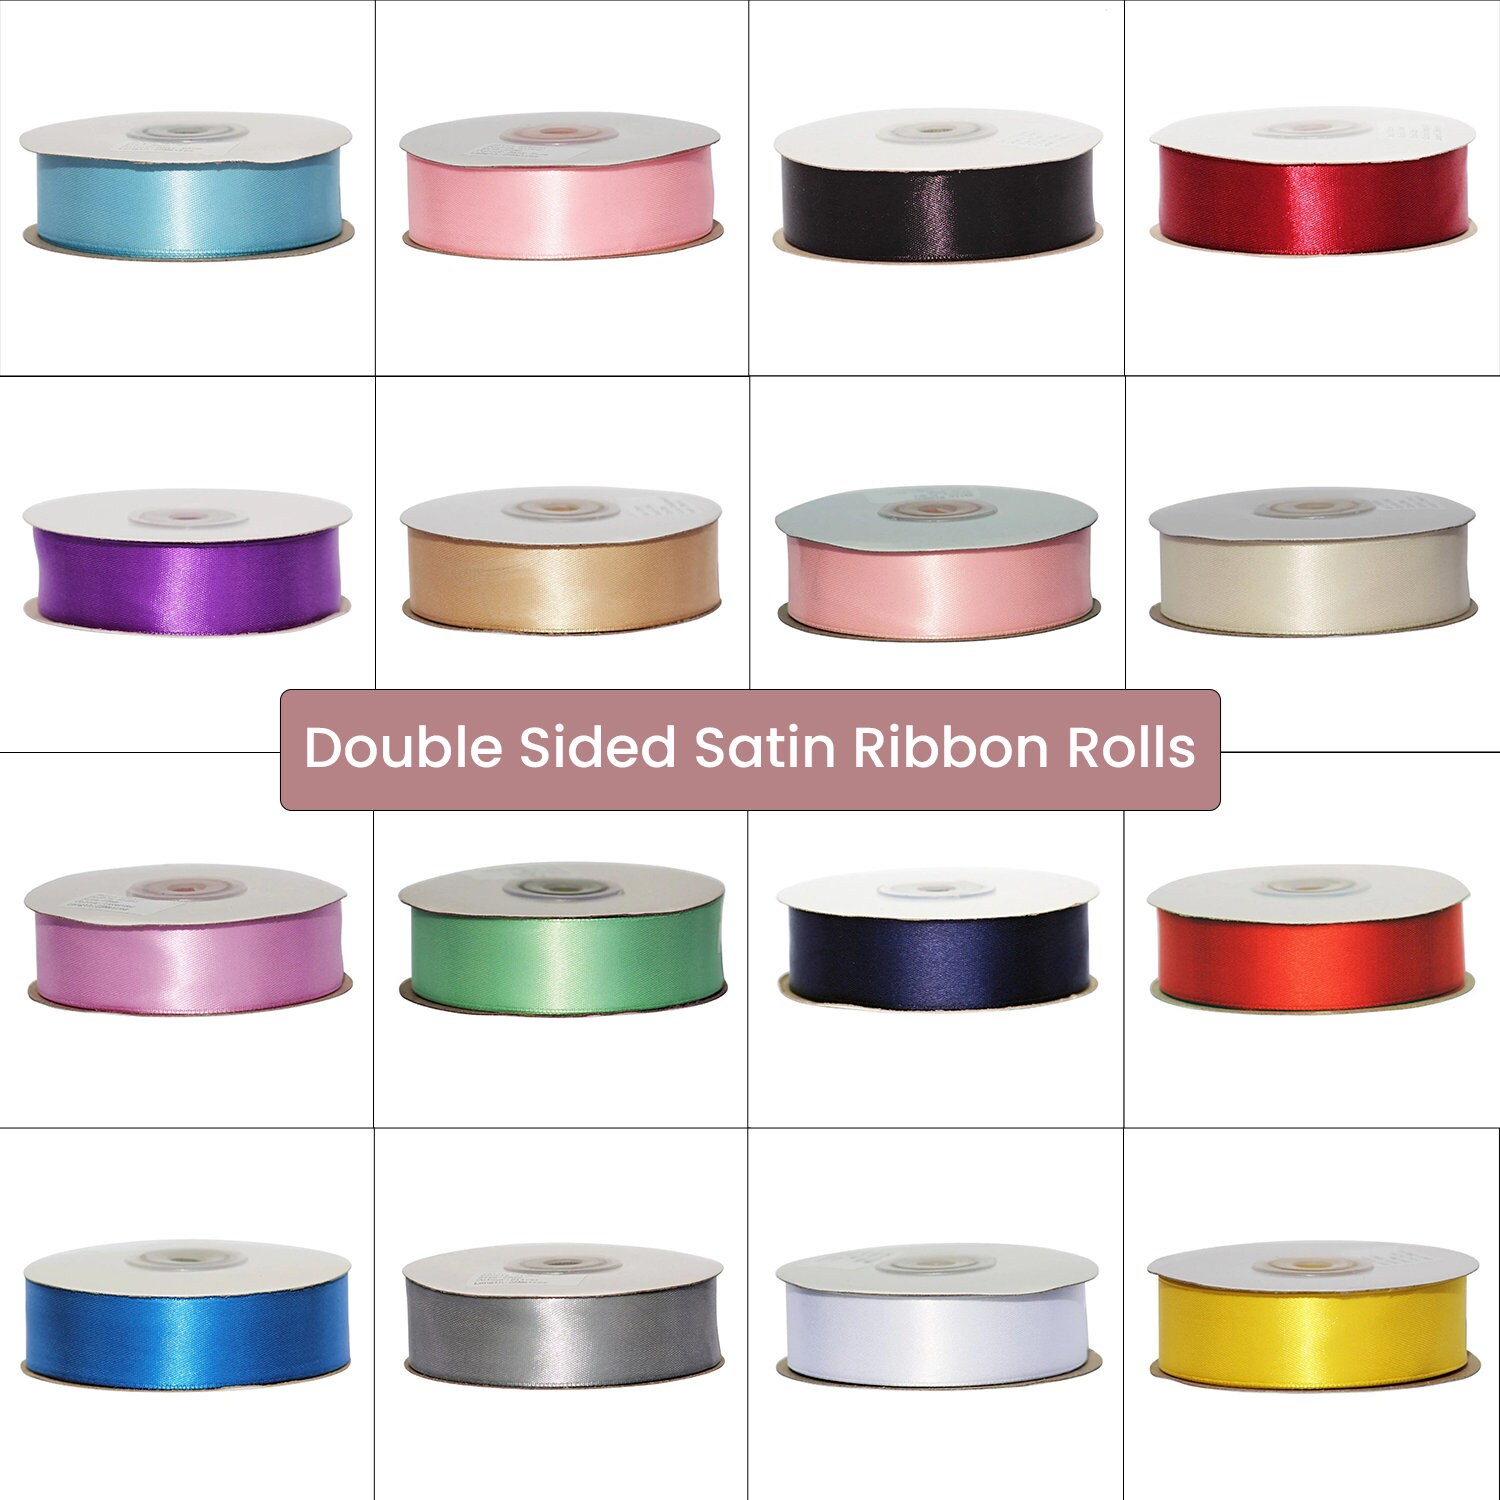 Emerald Green, 50 Metres x 3mm 25/50 Metres Double Sided Satin Ribbon Rolls 3mm 6mm 10mm 15mm 25mm 38mm 50mm 